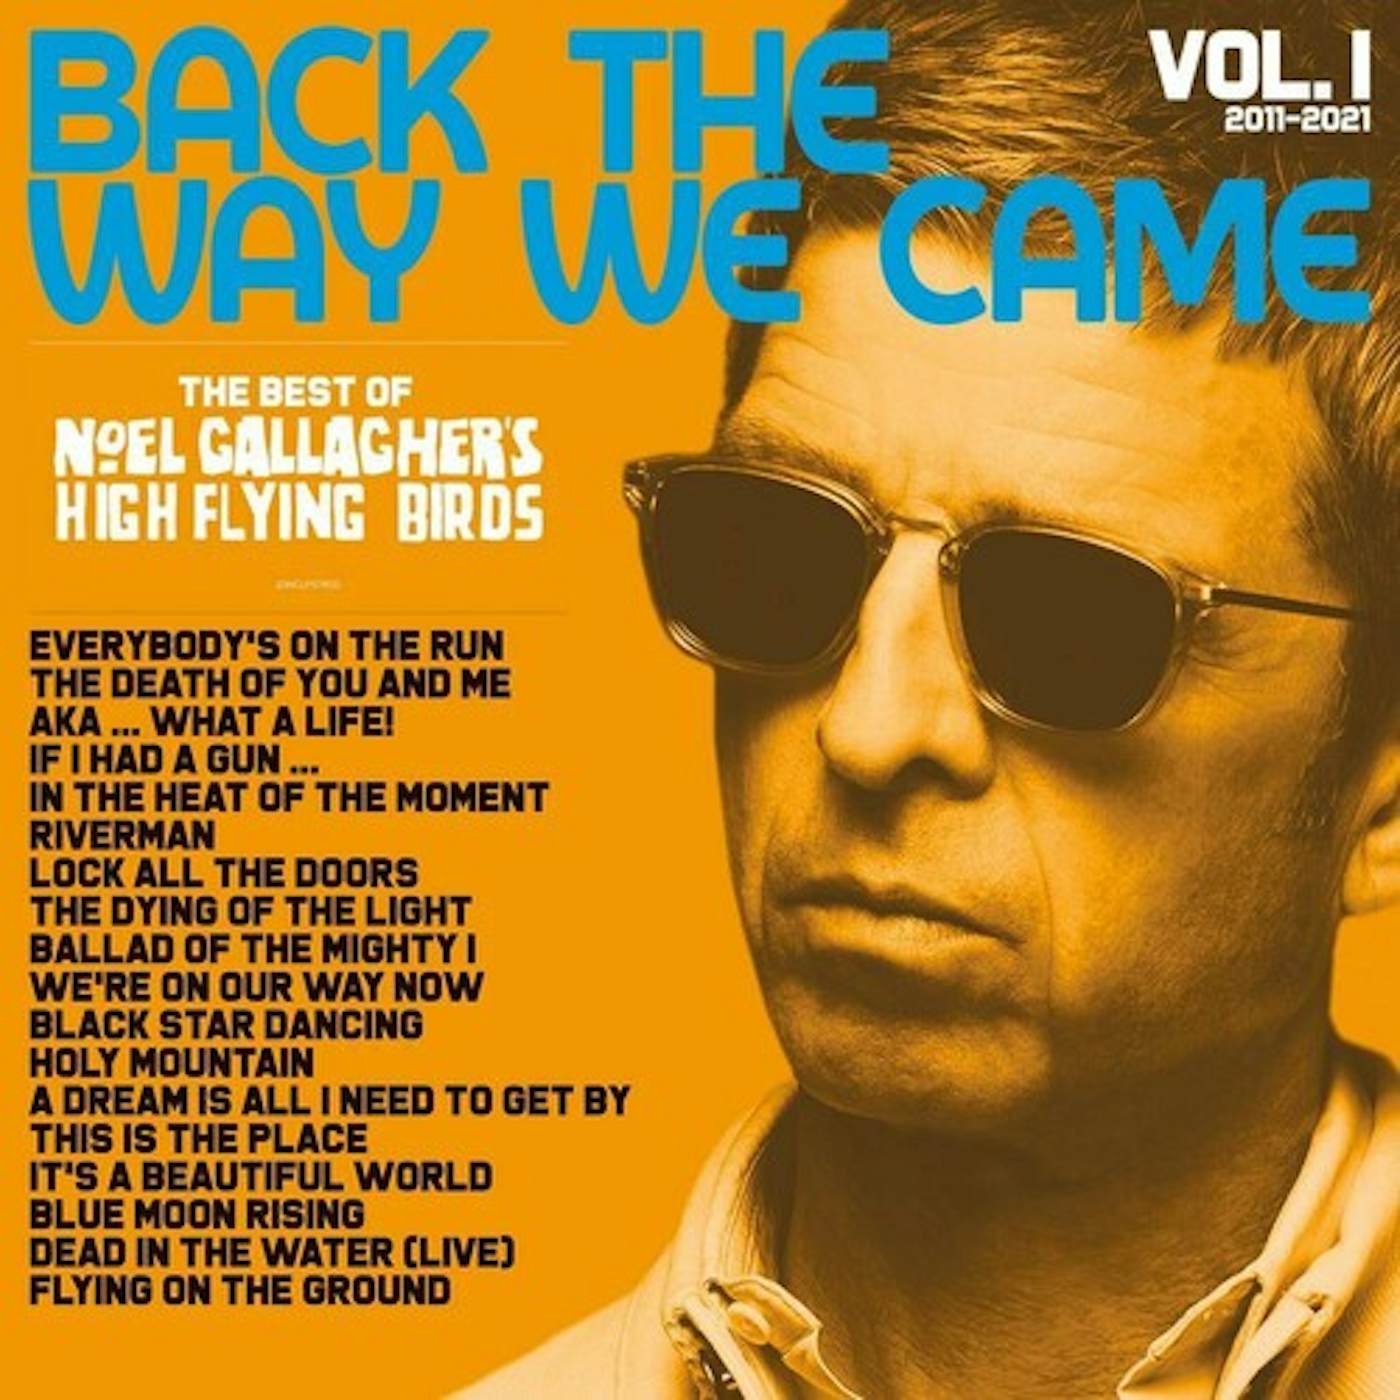 Noel Gallagher's High Flying Birds BACK THE WAY WE CAME: VOL 1 (2011-2021) Vinyl Record